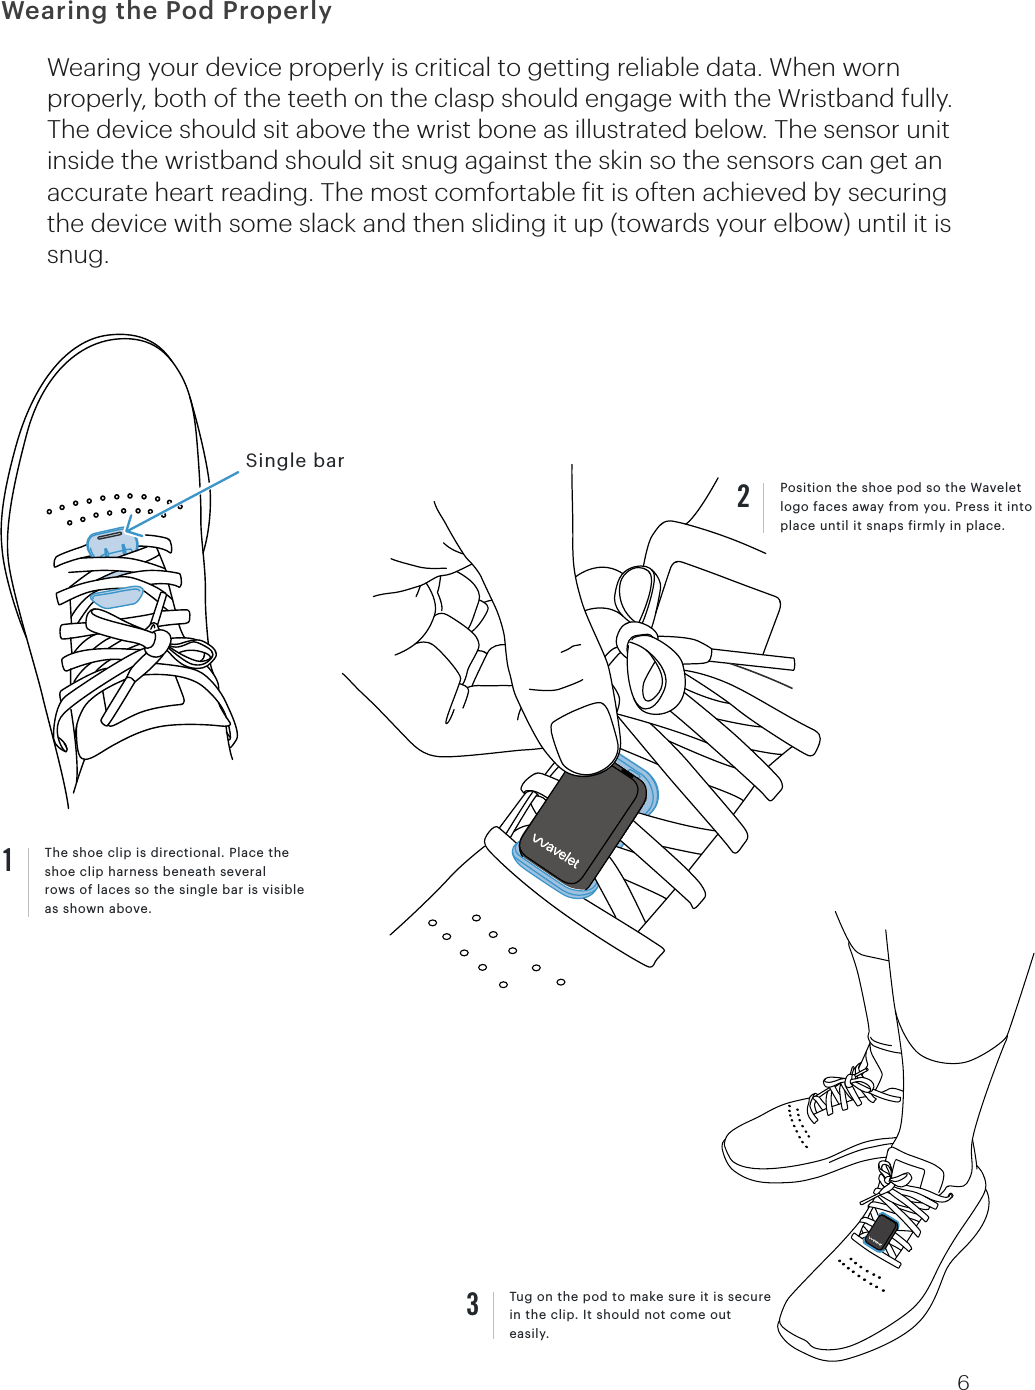 The shoe clip is directional. Place the shoe clip harness beneath severalrows of laces so the single bar is visible as shown above.1Wearing your device properly is critical to getting reliable data. When worn properly, both of the teeth on the clasp should engage with the Wristband fully. The device should sit above the wrist bone as illustrated below. The sensor unit inside the wristband should sit snug against the skin so the sensors can get an accurate heart reading. The most comfortable it is often achieved by securing the device with some slack and then sliding it up (towards your elbow) until it is snug.Tug on the pod to make sure it is secure in the clip. It should not come out easily.3Single barPosition the shoe pod so the Wavelet logo faces away from you. Press it into place until it snaps irmly in place. 26Wearing the Pod Properly